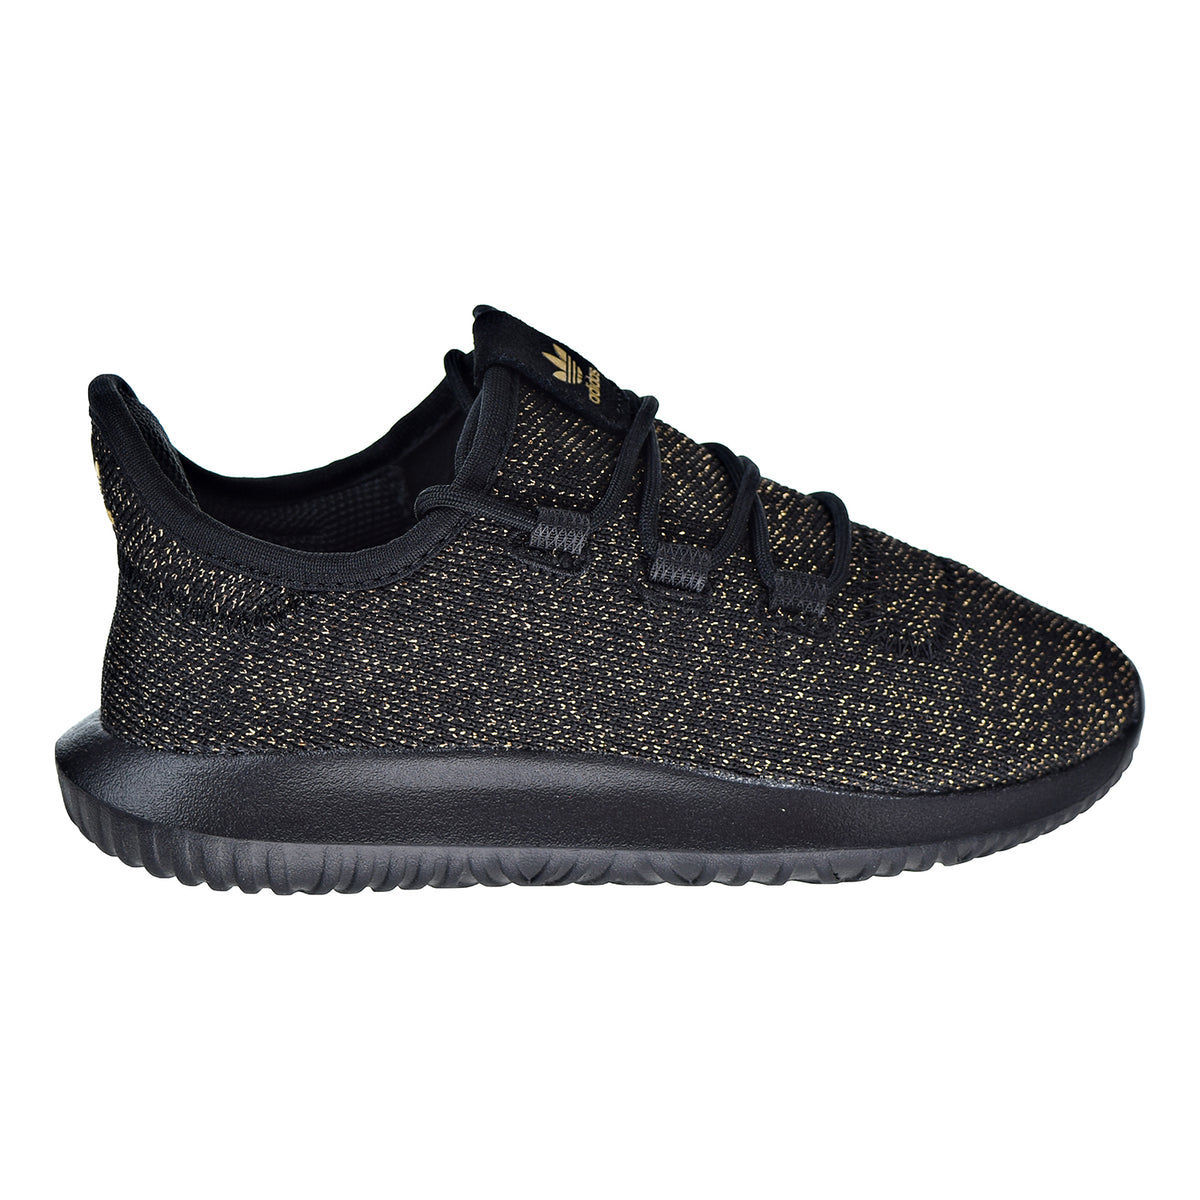 Continental Sightseeing koncept Adidas Tubular Shadow Little Kids' Shoes Core Black / Gold Glitter